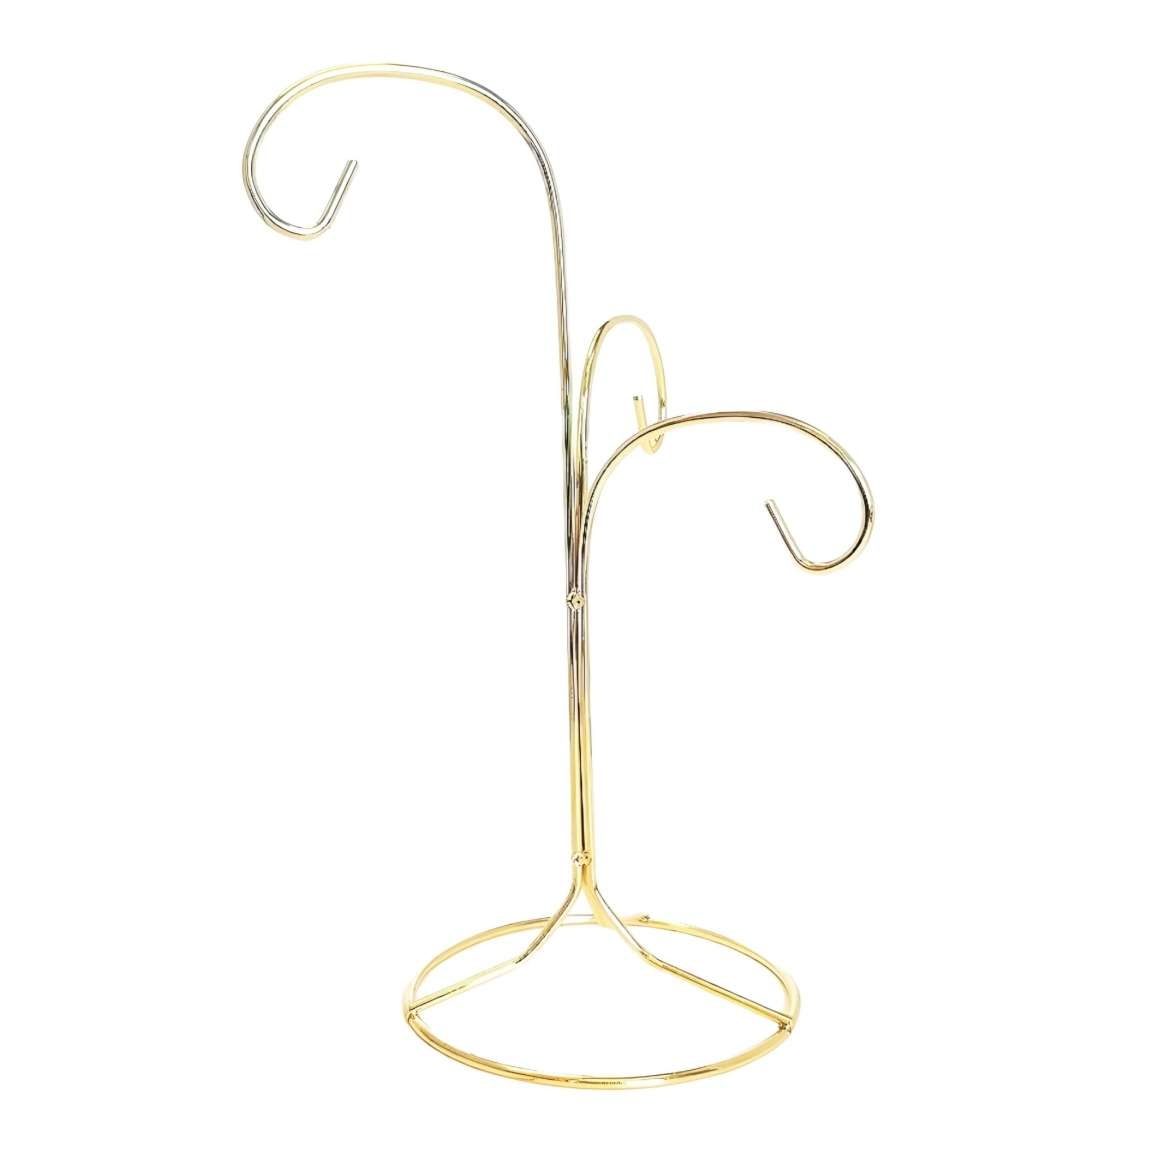 Three Hook Ornament Display Stand, 9 Inch